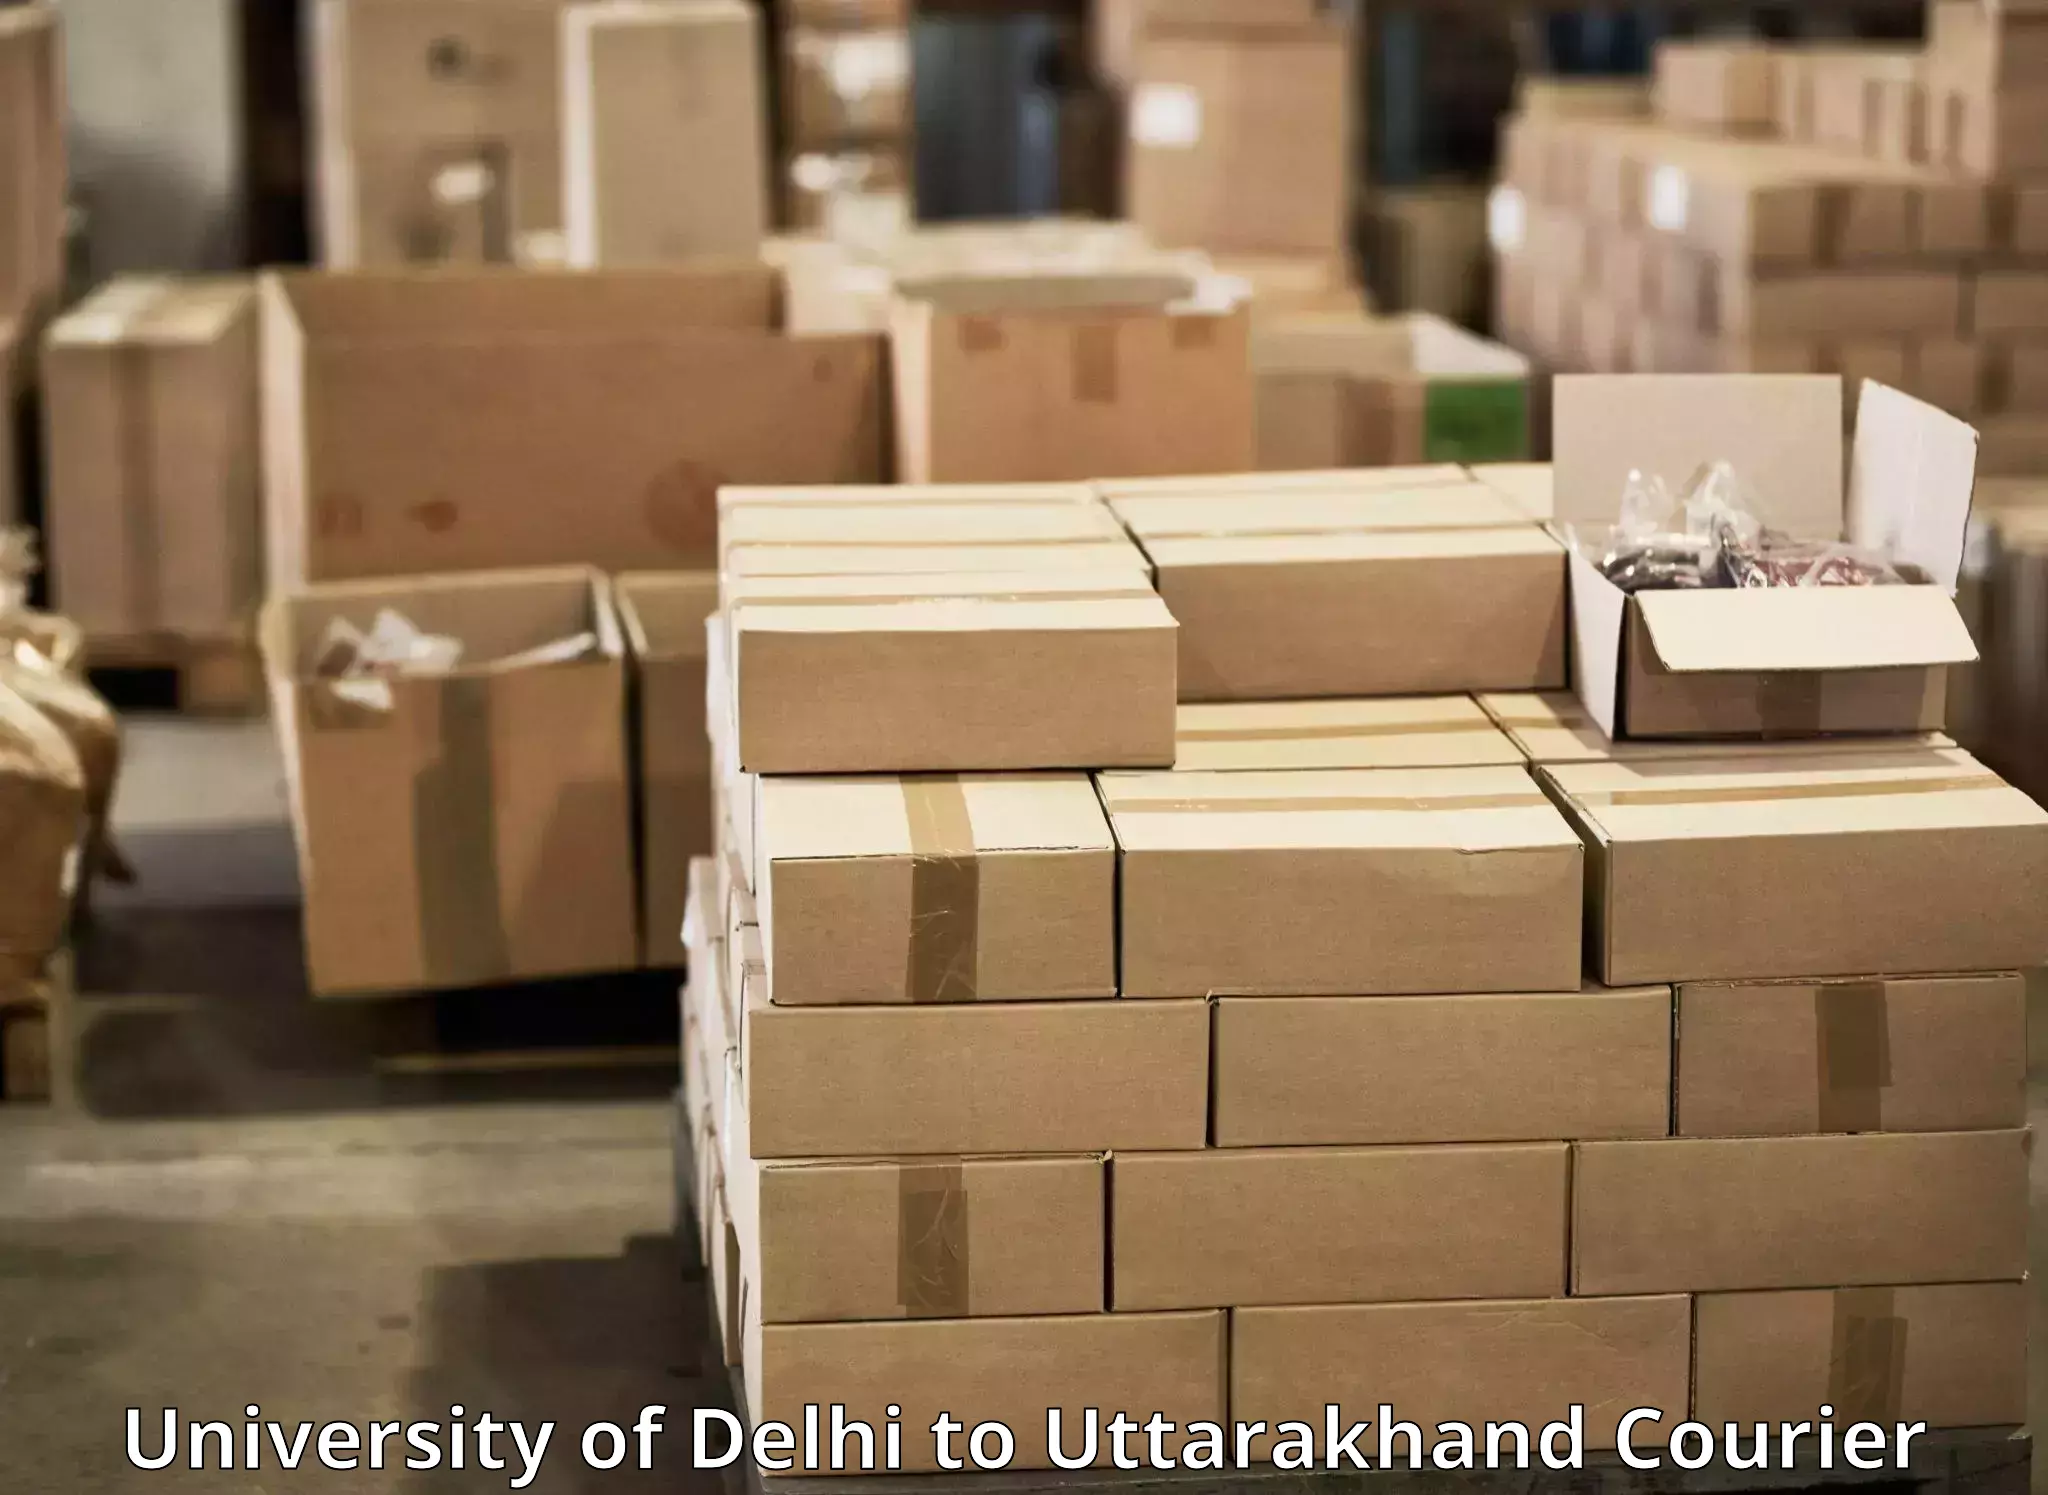 Express delivery network University of Delhi to Tehri Garhwal